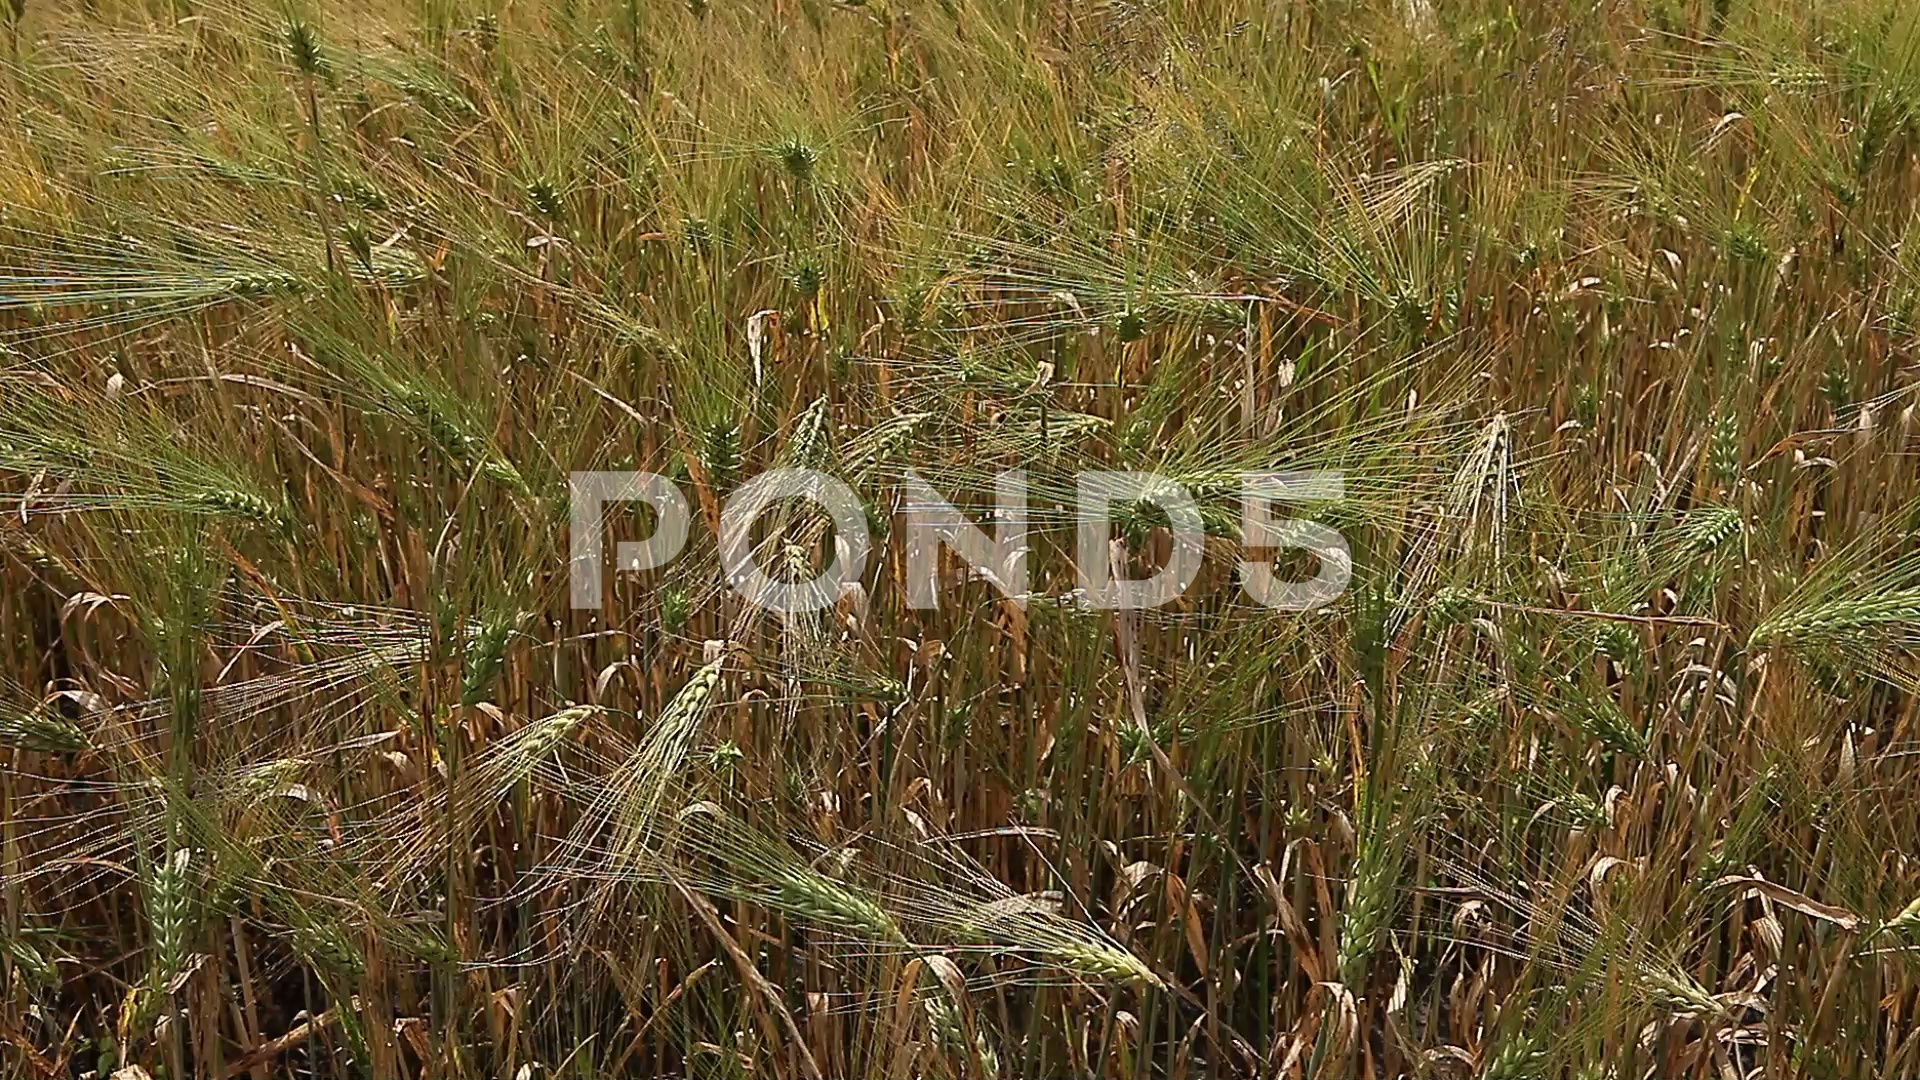 Wheat grain crop field on a sunny day ~ Footage #77284933